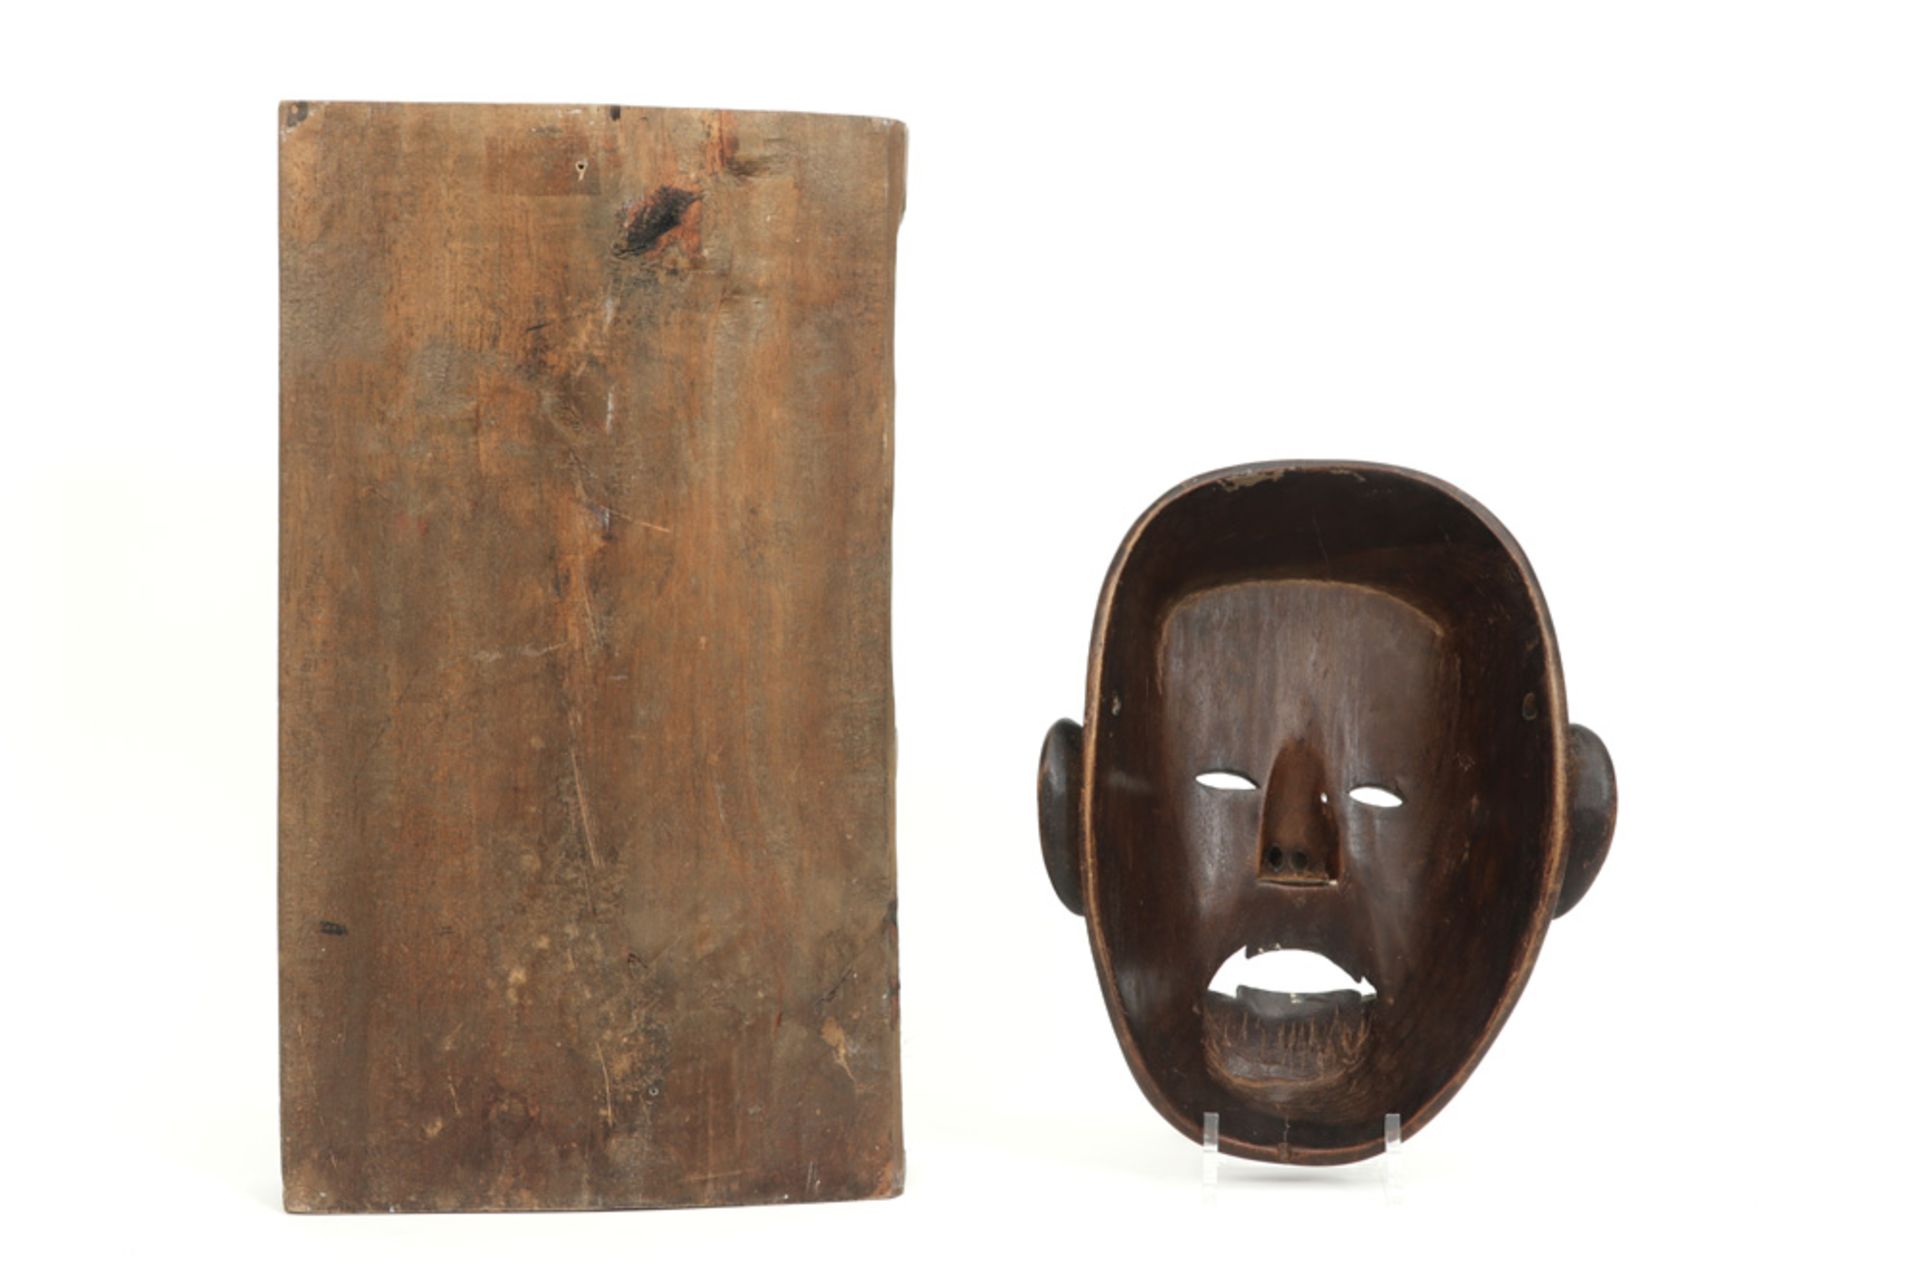 Japanese mask and Indian sculpture in wood - Image 2 of 2